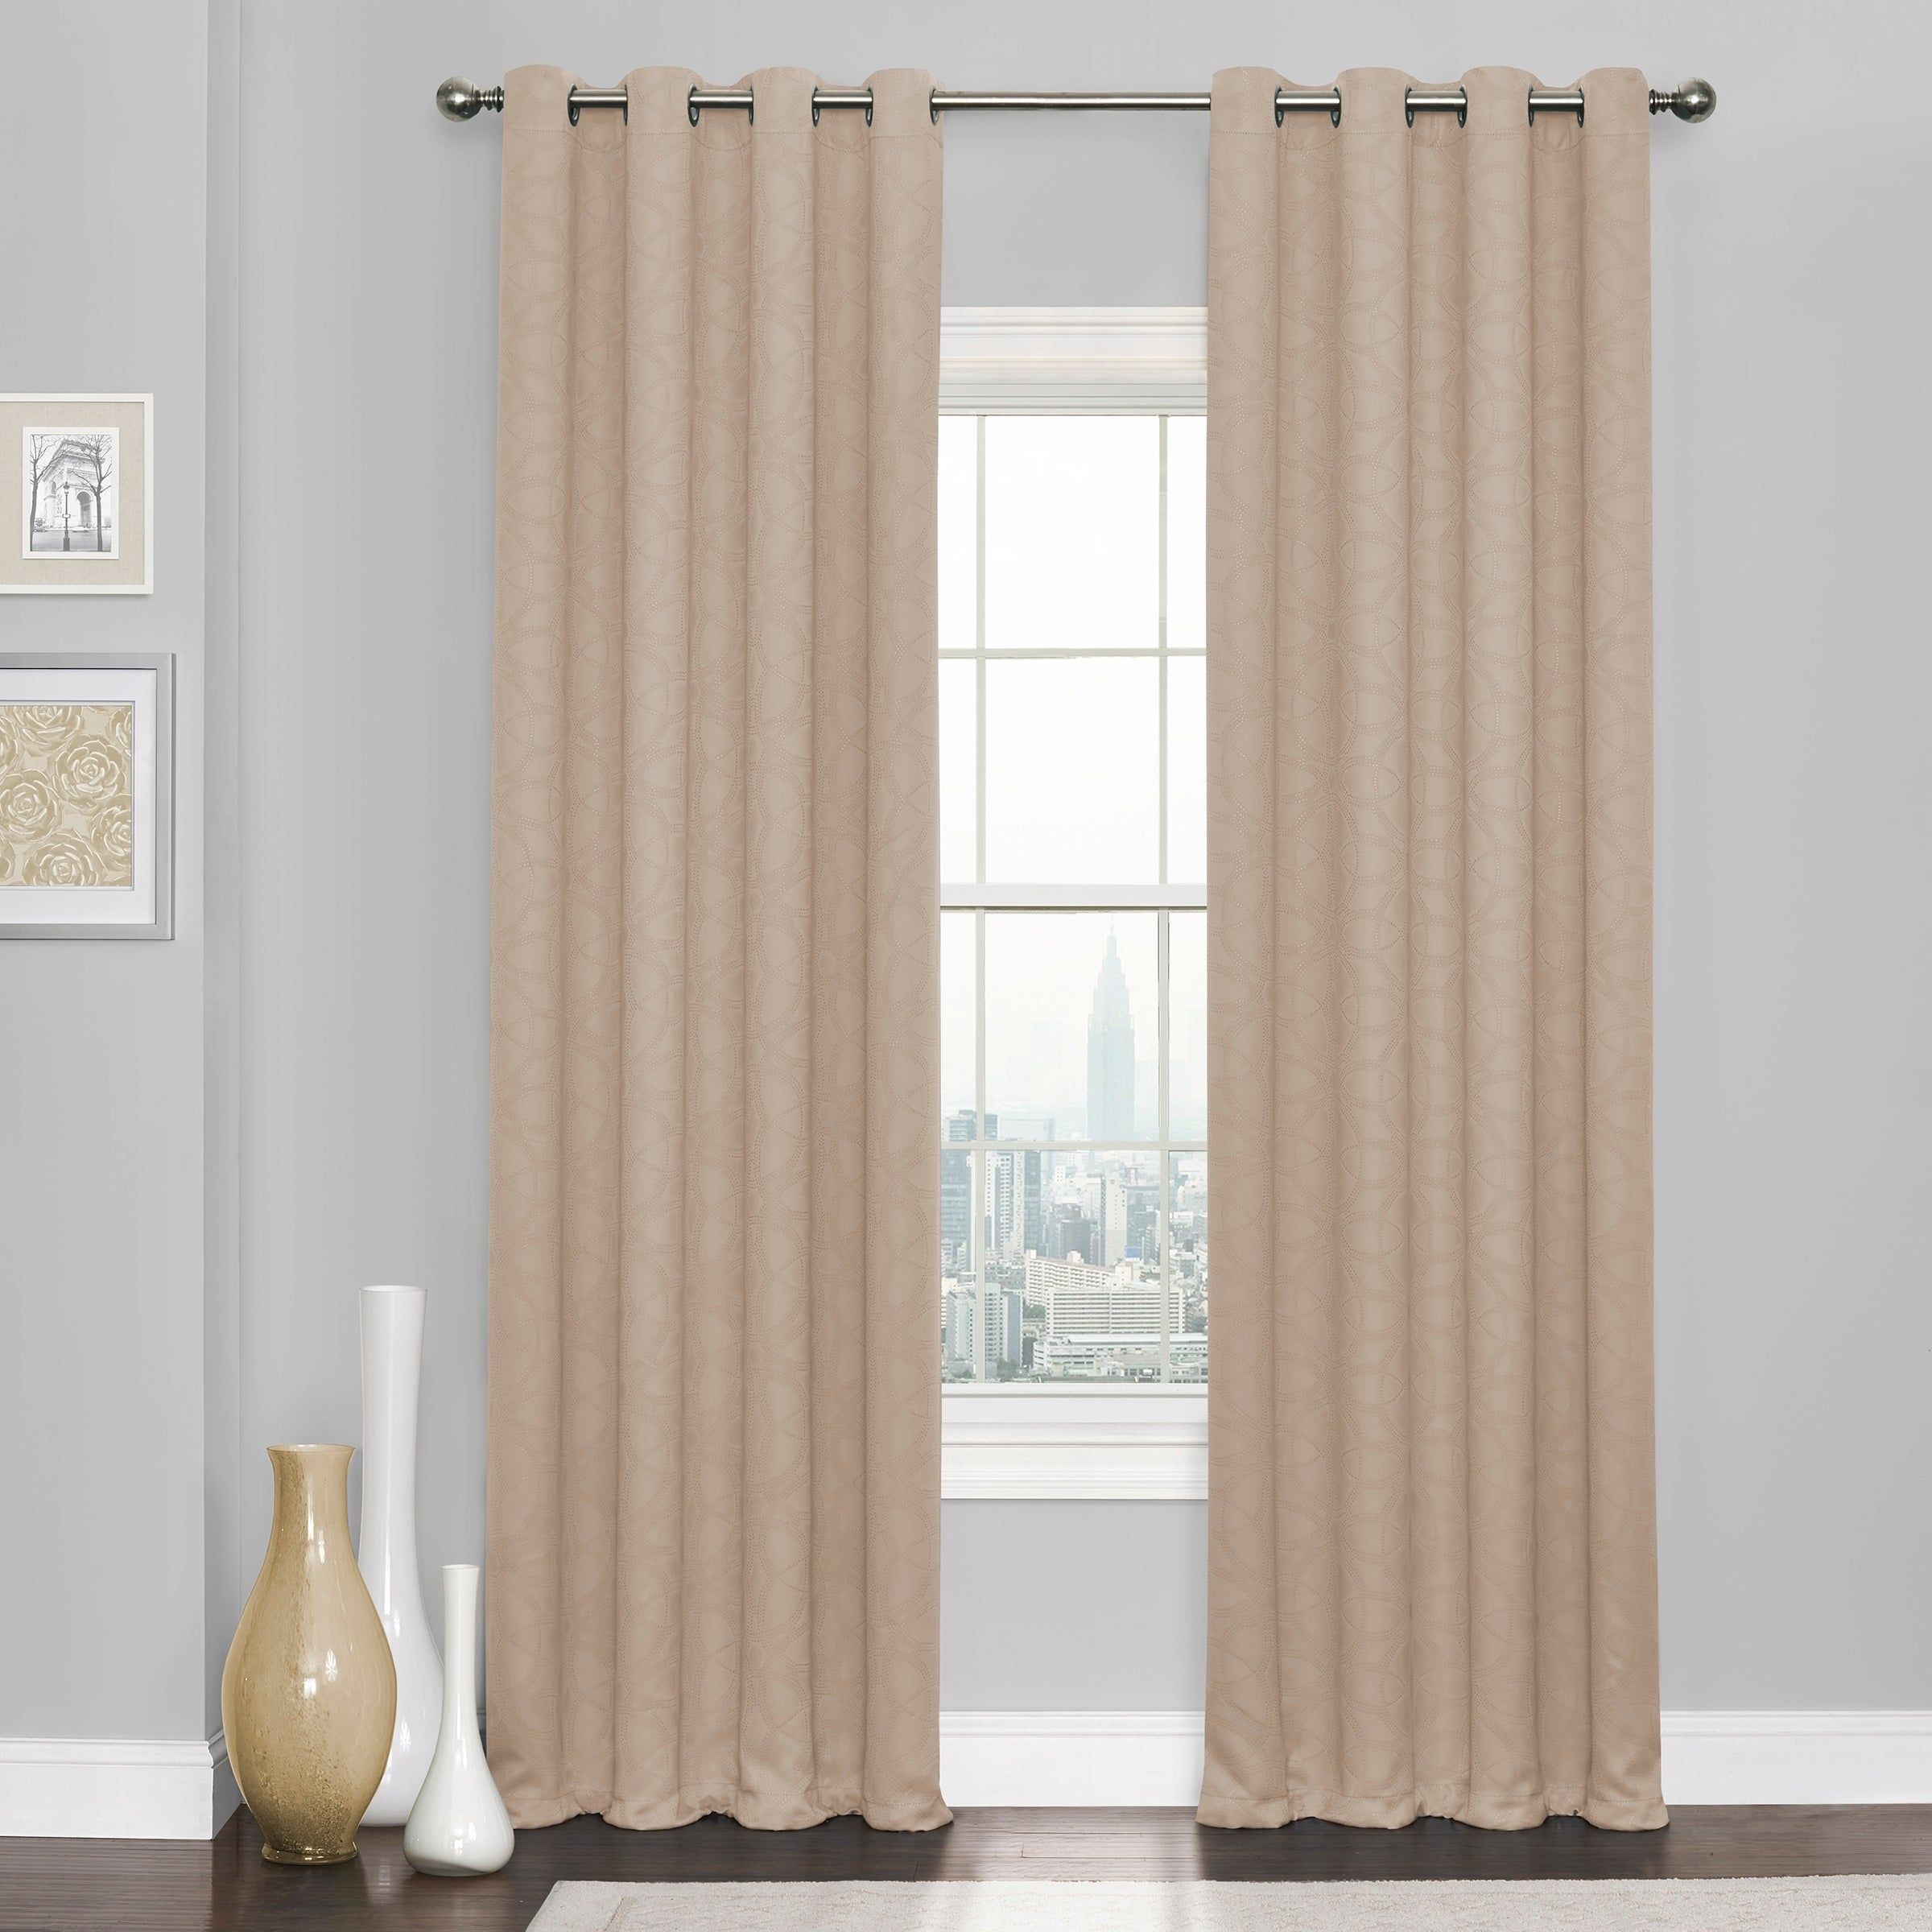 Eclipse Kingston Thermaweave Blackout Curtains – N/a With Regard To Thermaweave Blackout Curtains (View 2 of 30)